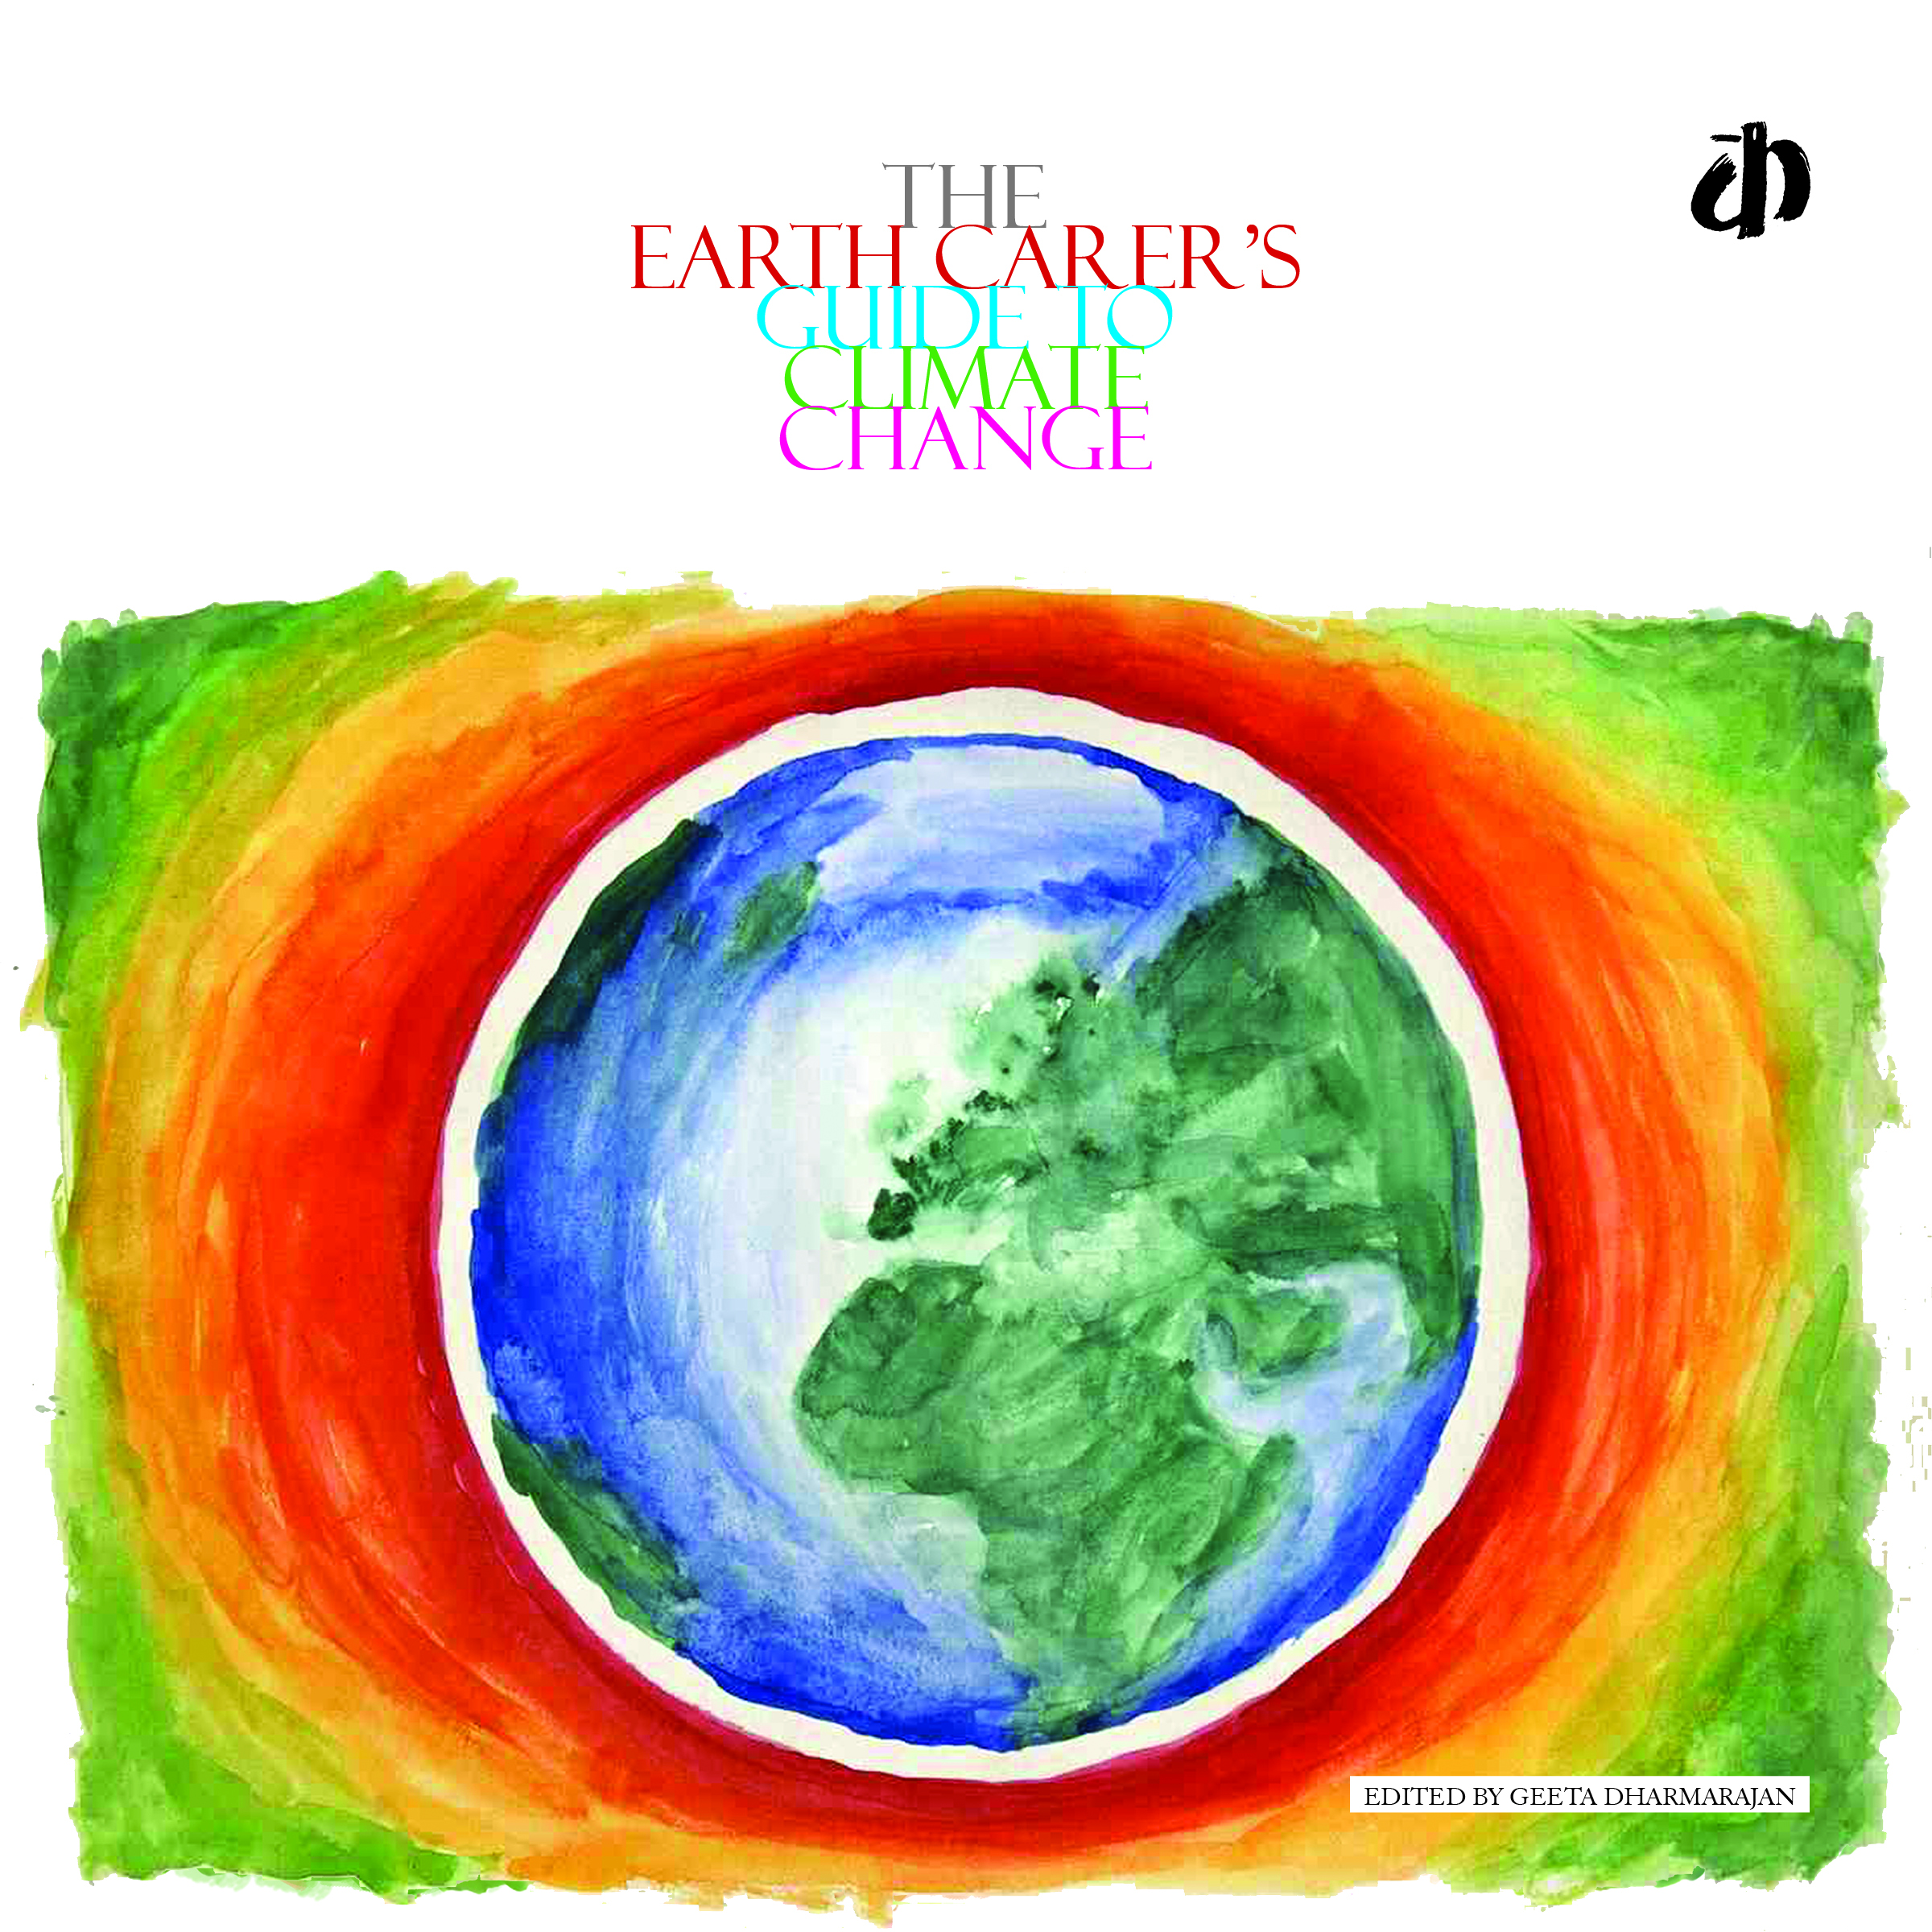 The Earth Carer's Guide to Climate Change! â€“ Katha Books